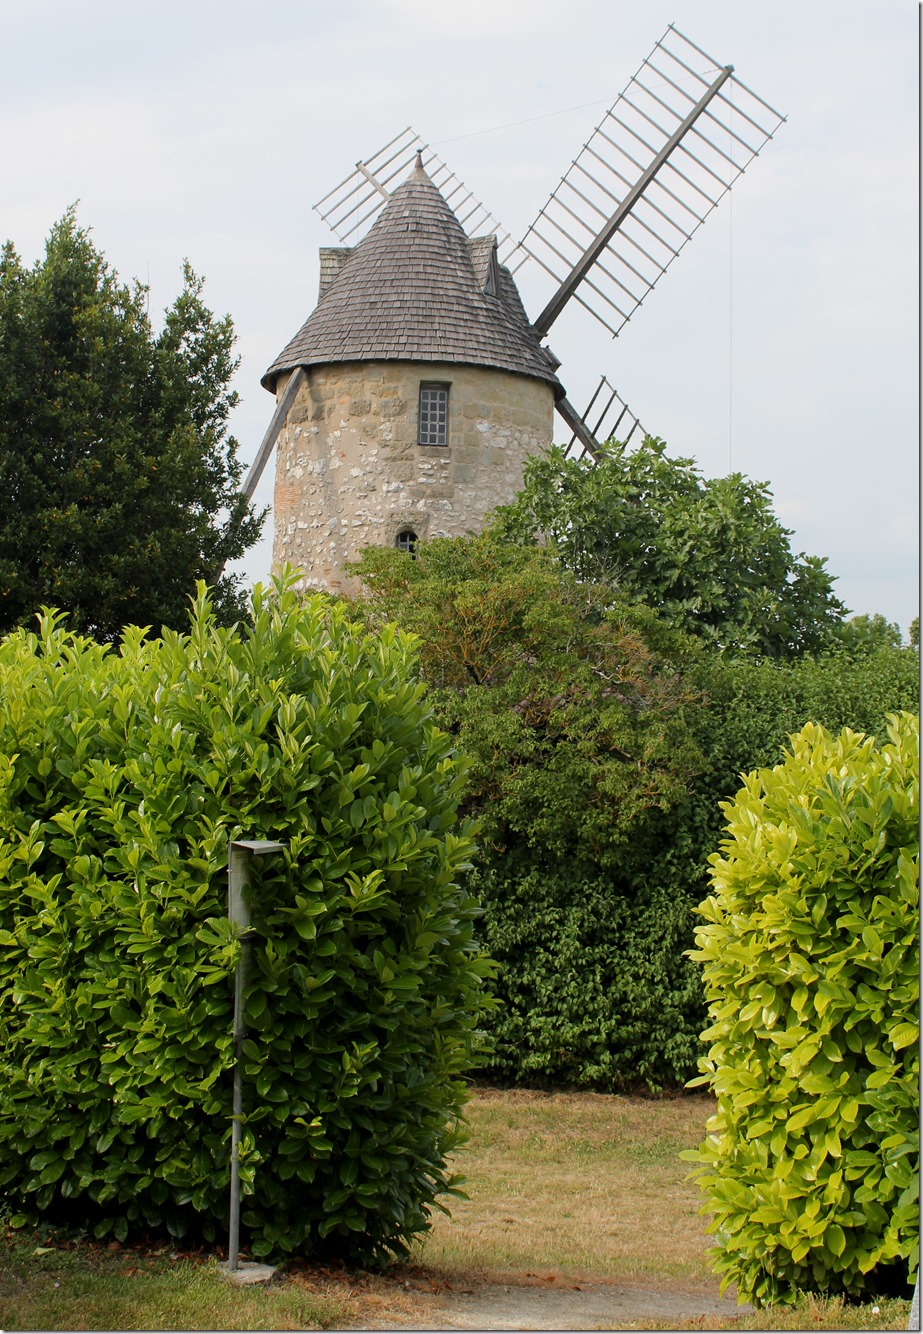 The windmill at Tourtres